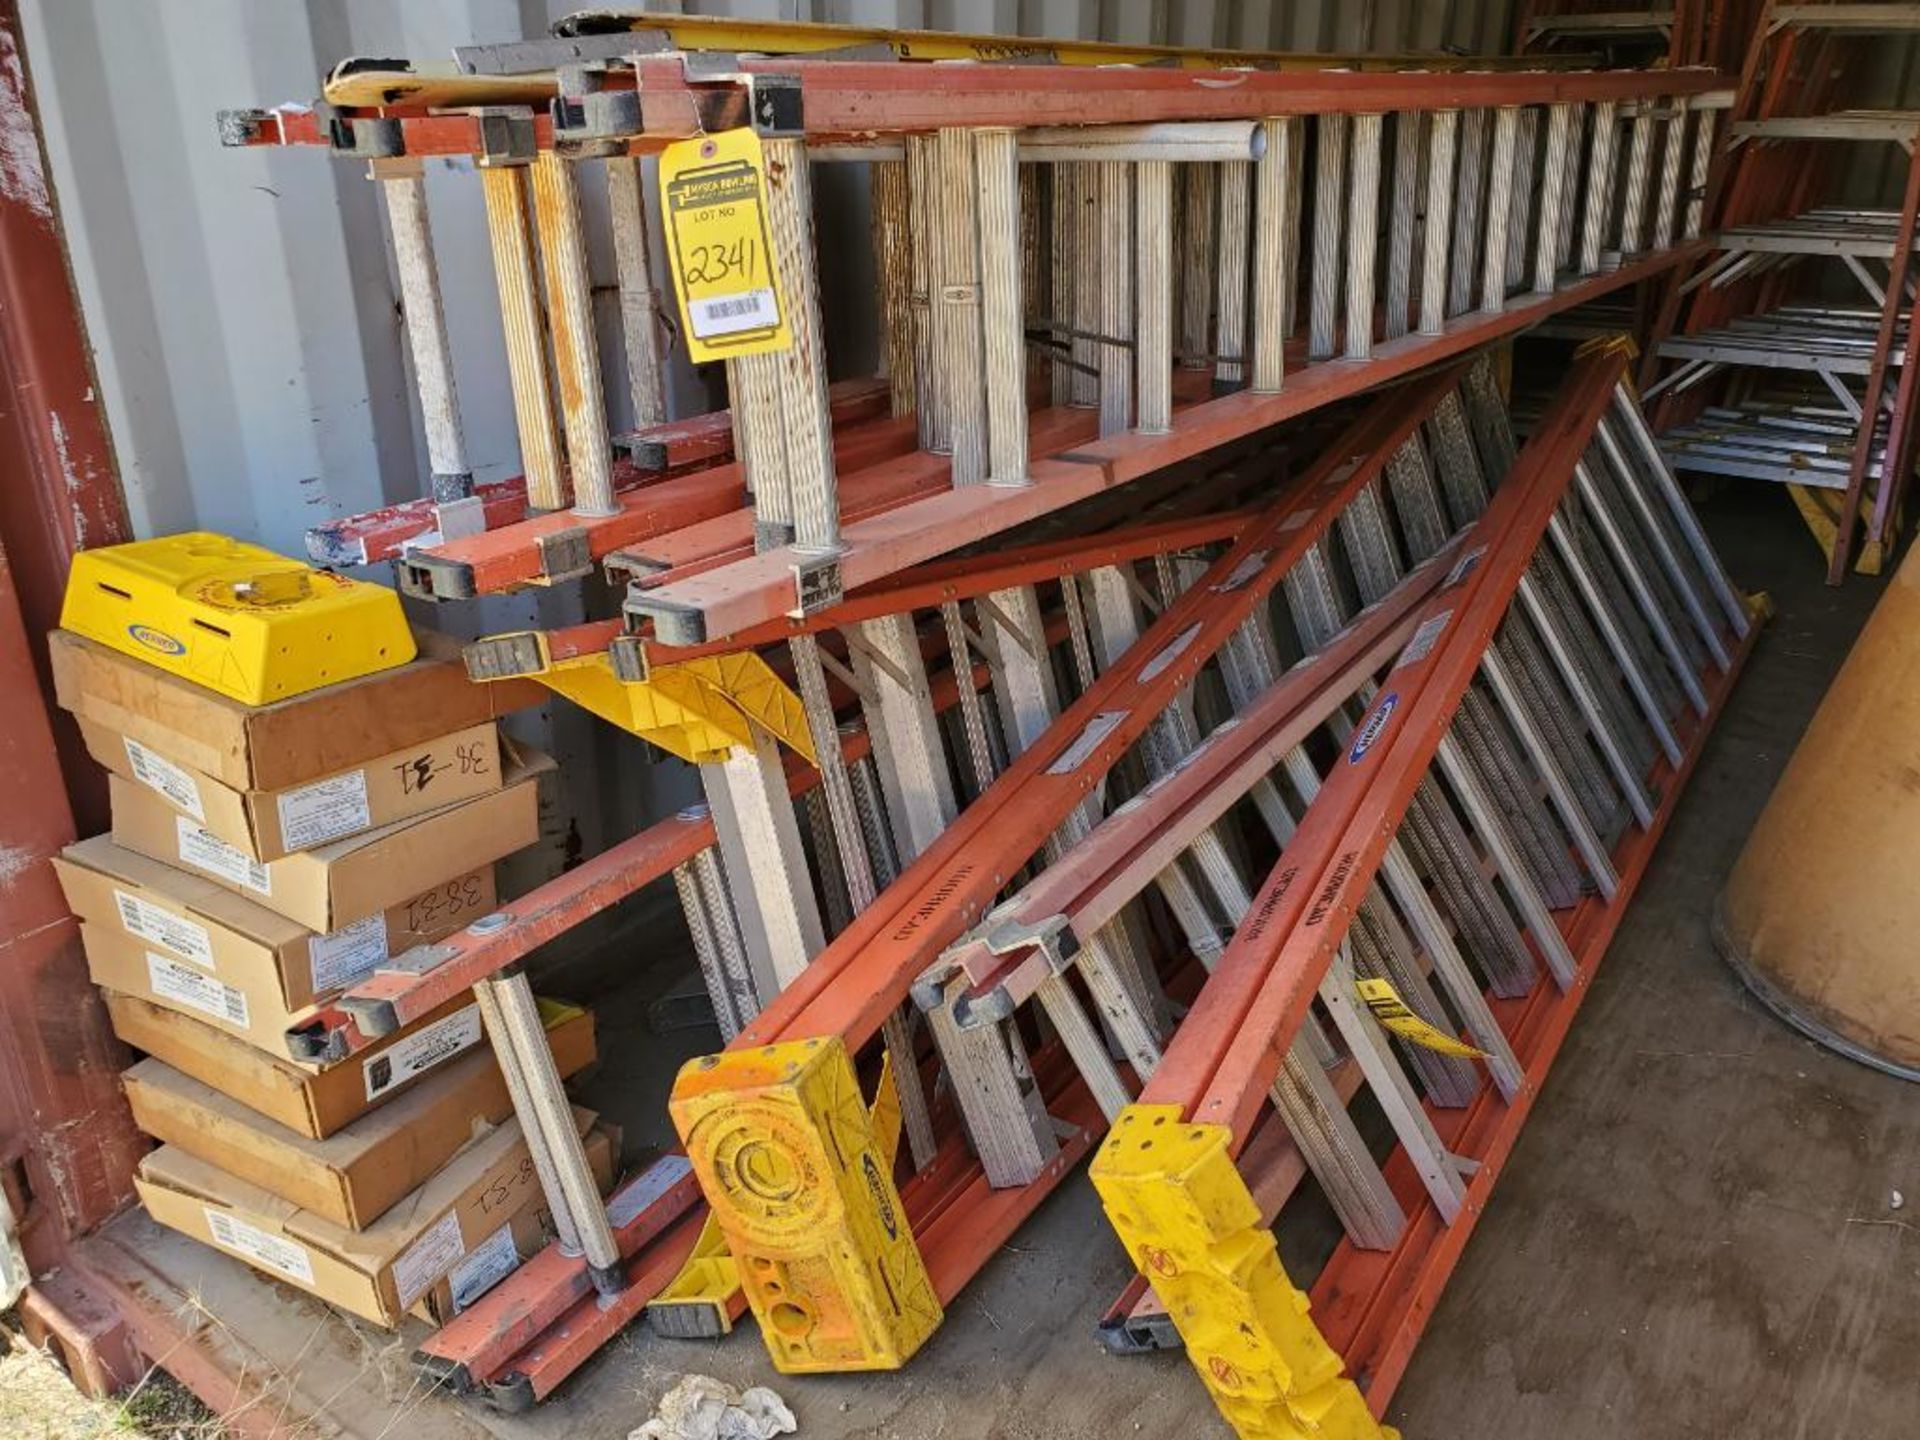 (12) ASSORTED WERNER EXTENSION LADDERS AND STEP LADDERS 10'-24' - Image 2 of 5